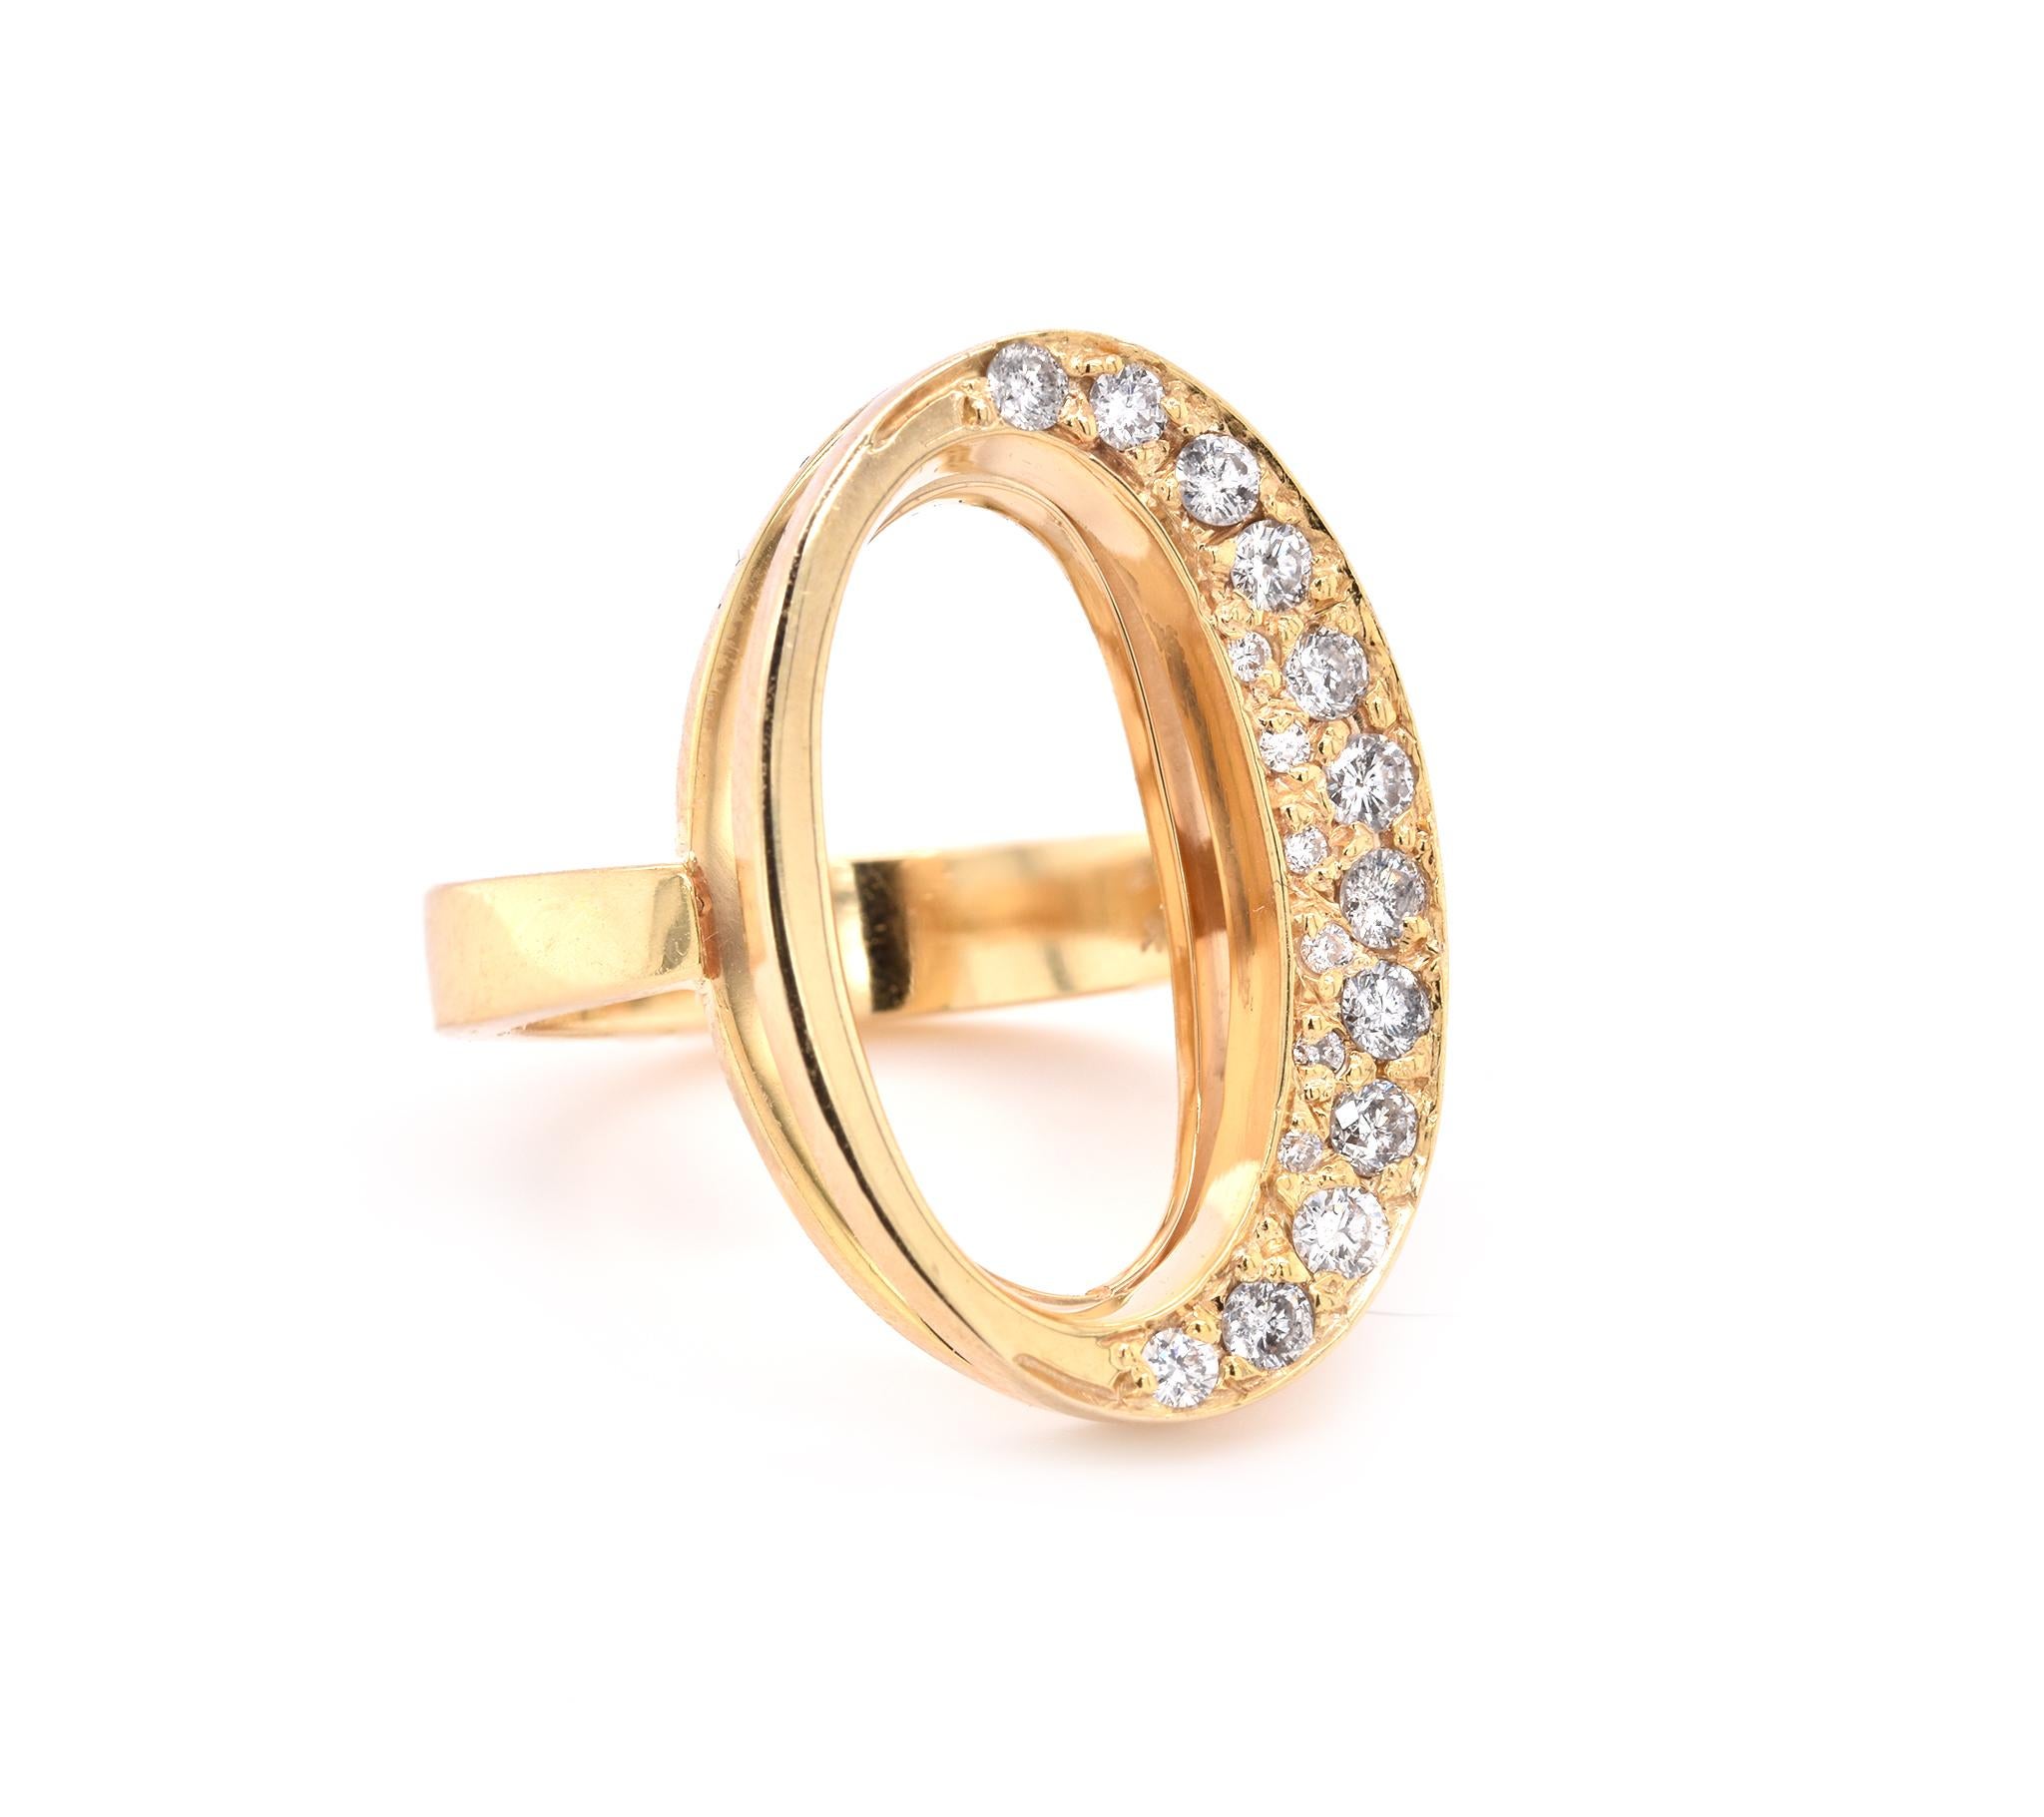 Designer: custom design
Material: 14k yellow gold
Diamonds: 18 round brilliant cut = 1.00cttw
Color: G
Clarity: VS
Ring size: 7 (please allow two additional shipping days for sizing requests)
Dimensions: ring is approximately 24mm X 15.75mm 
Weight: